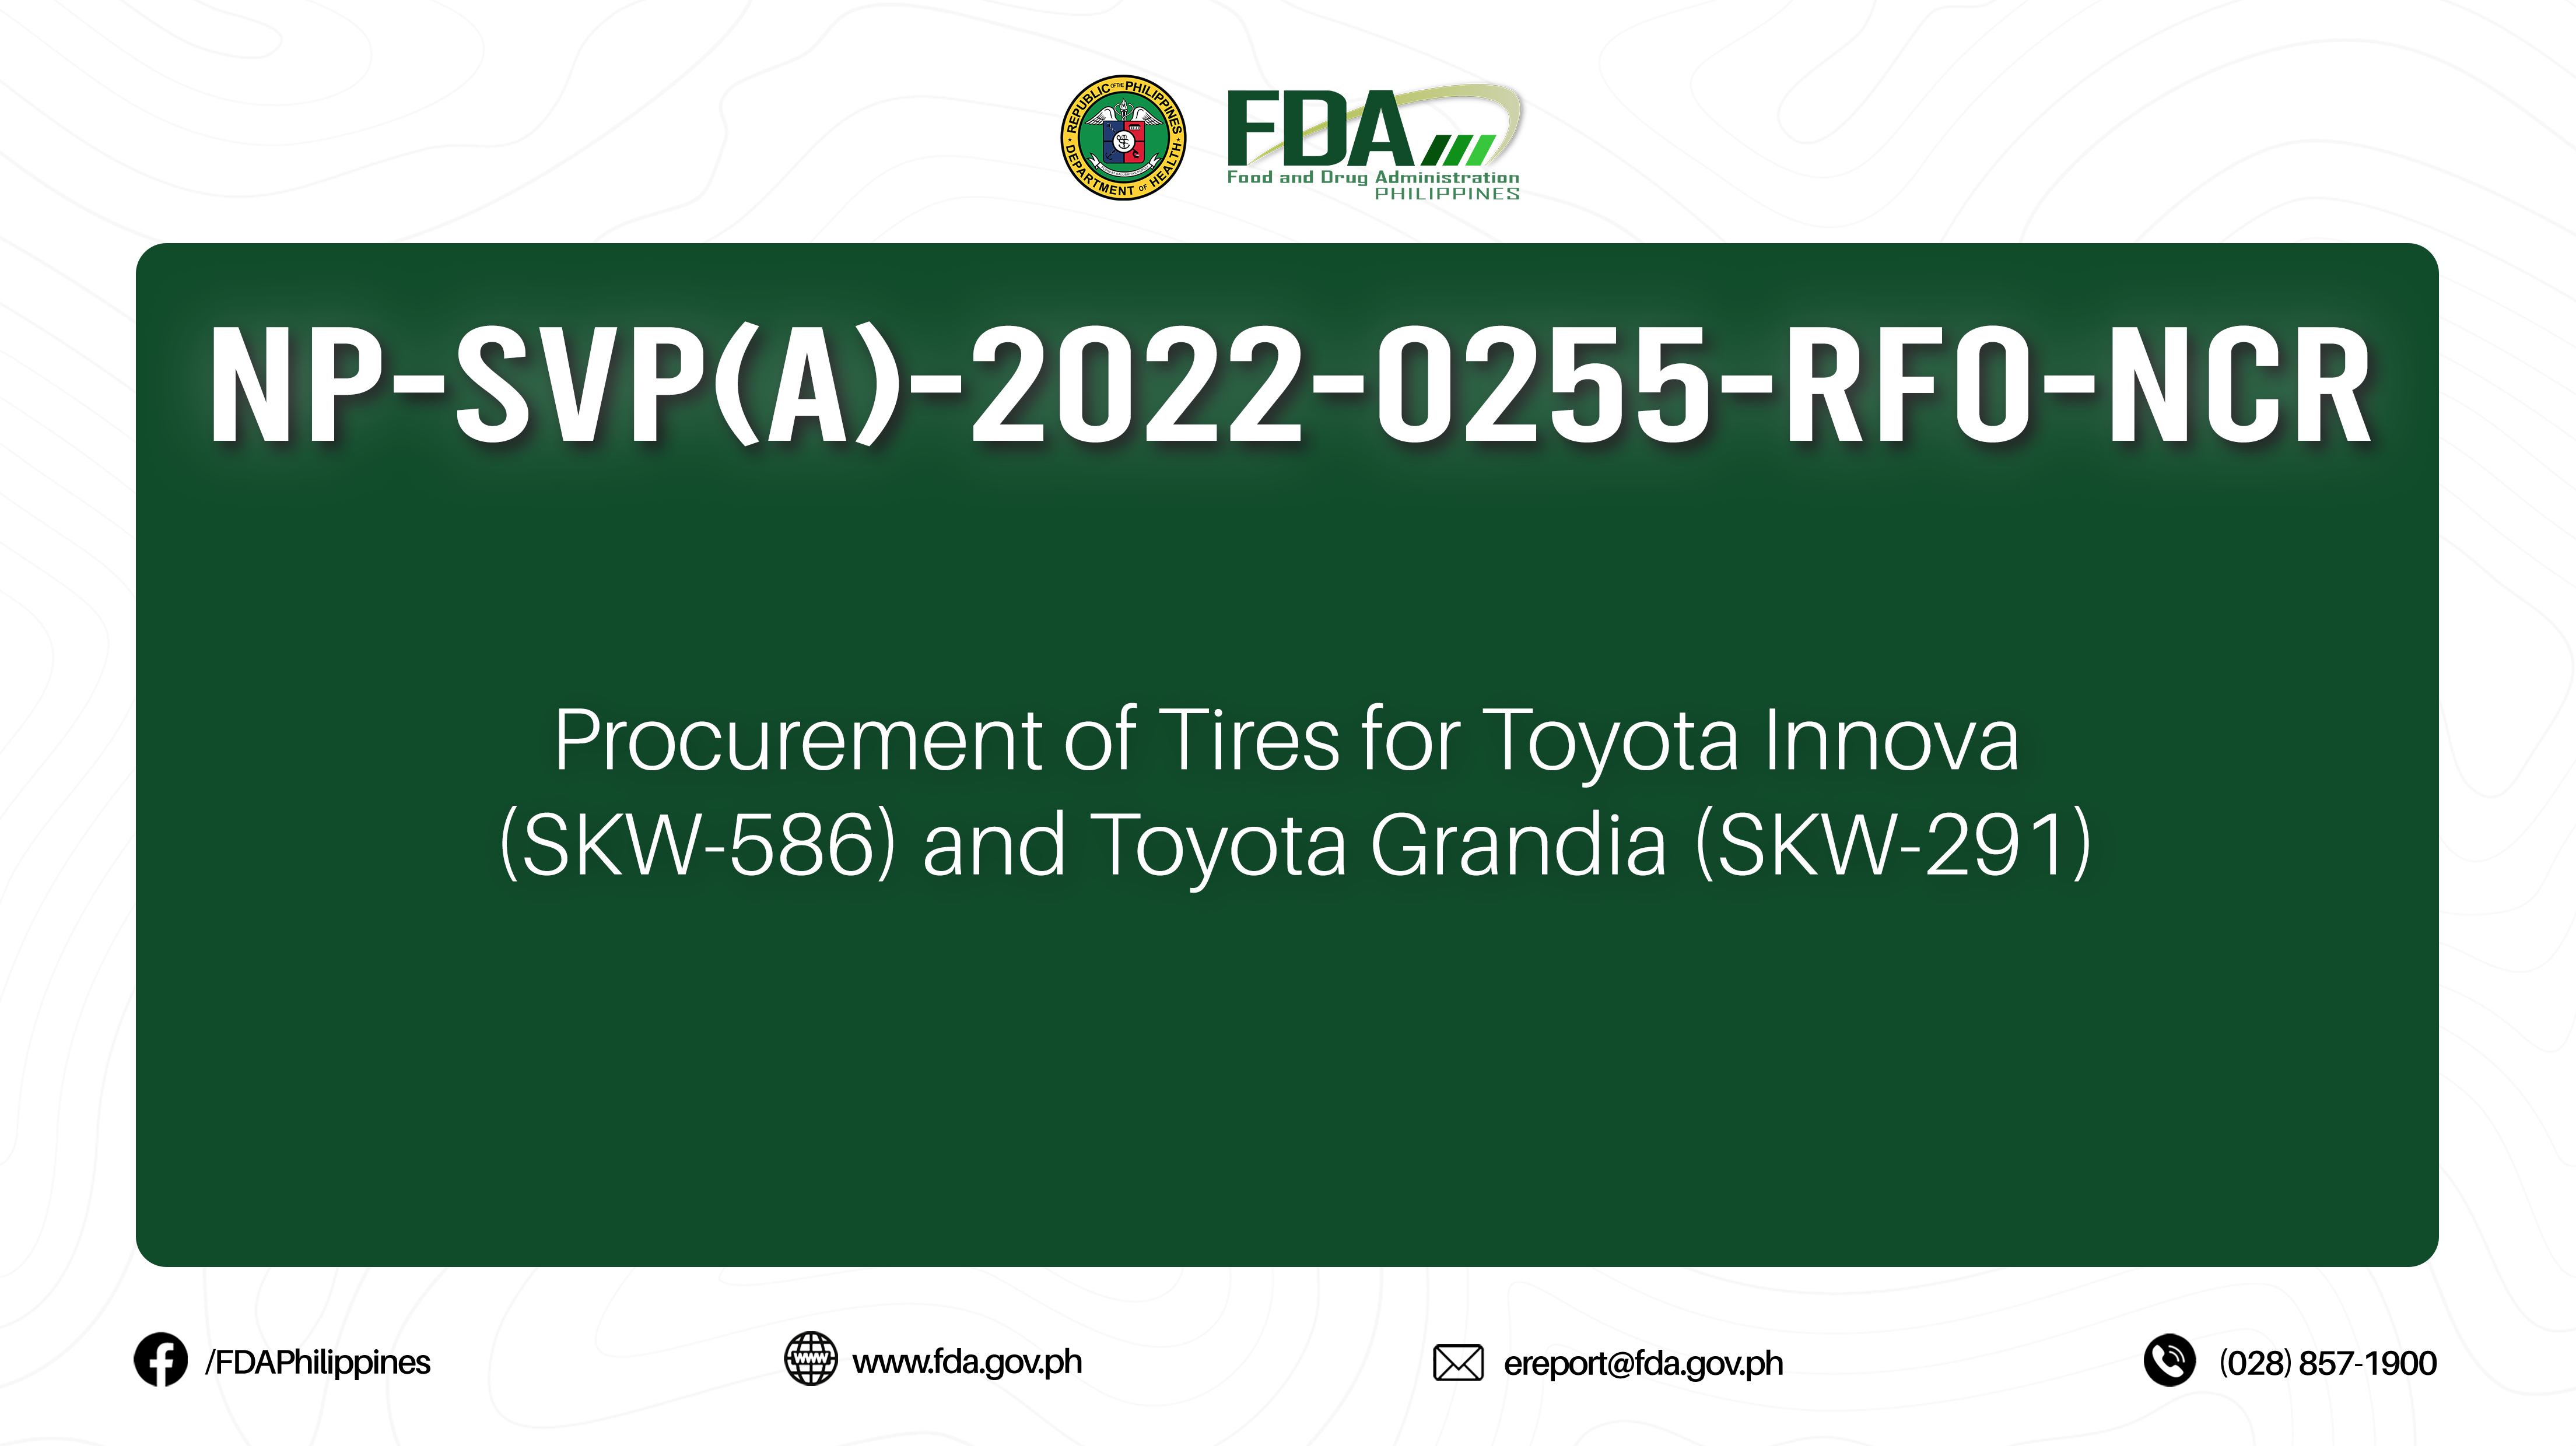 NP-SVP(A)-2022-0255-RFO-NCR || Procurement of Tires for Toyota Innova (SKW-586) and Toyota Grandia (SKW-291)